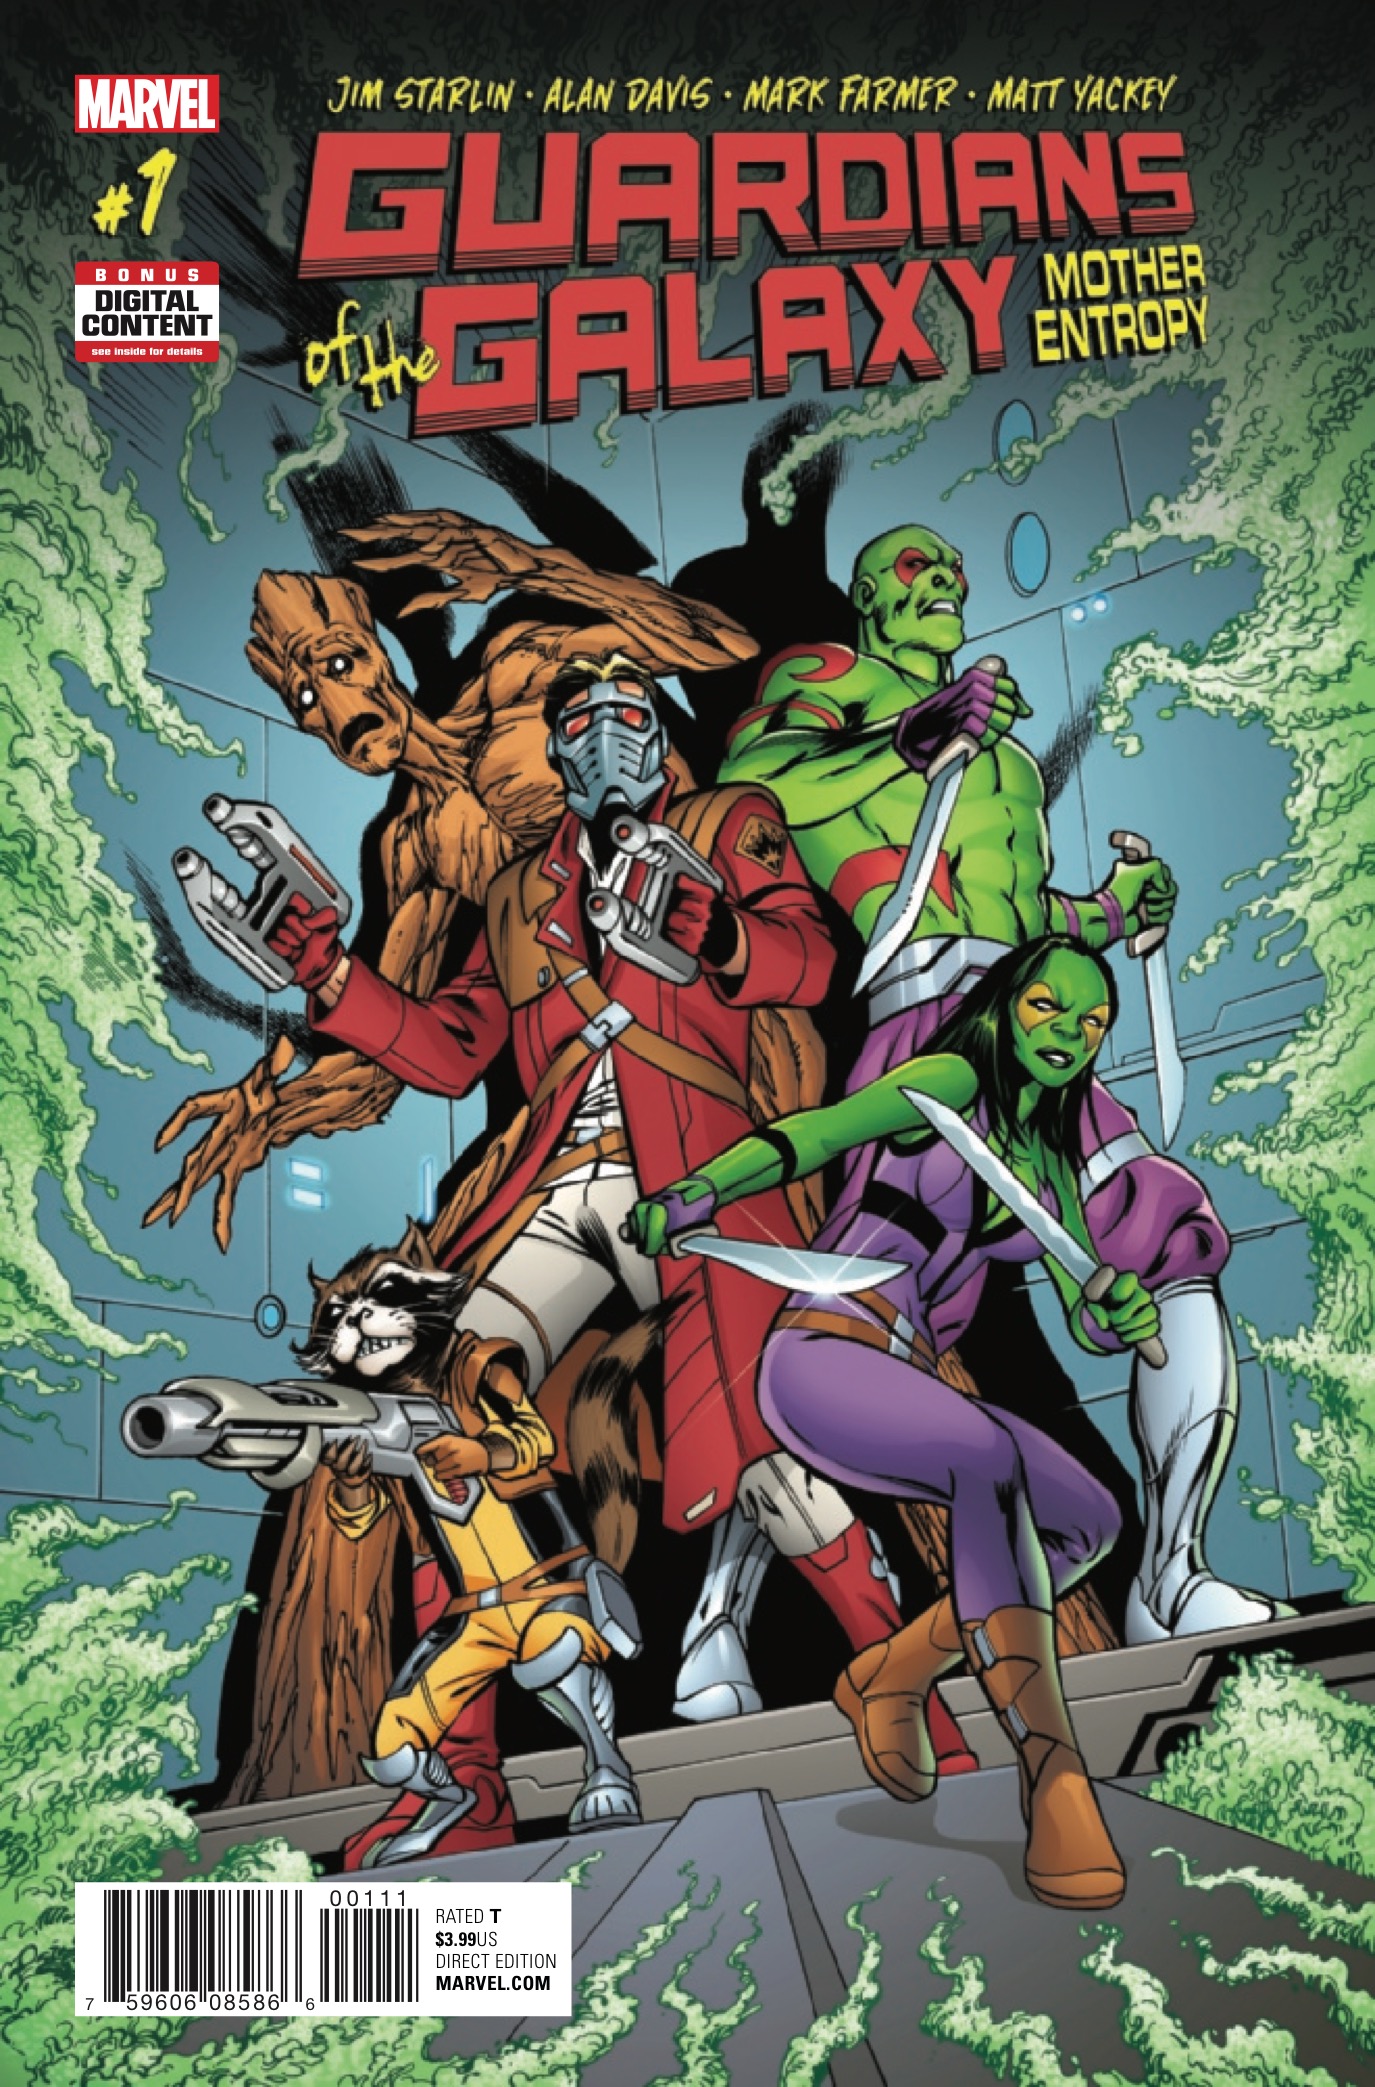 Guardians of the Galaxy: Mother Entropy #1 Review